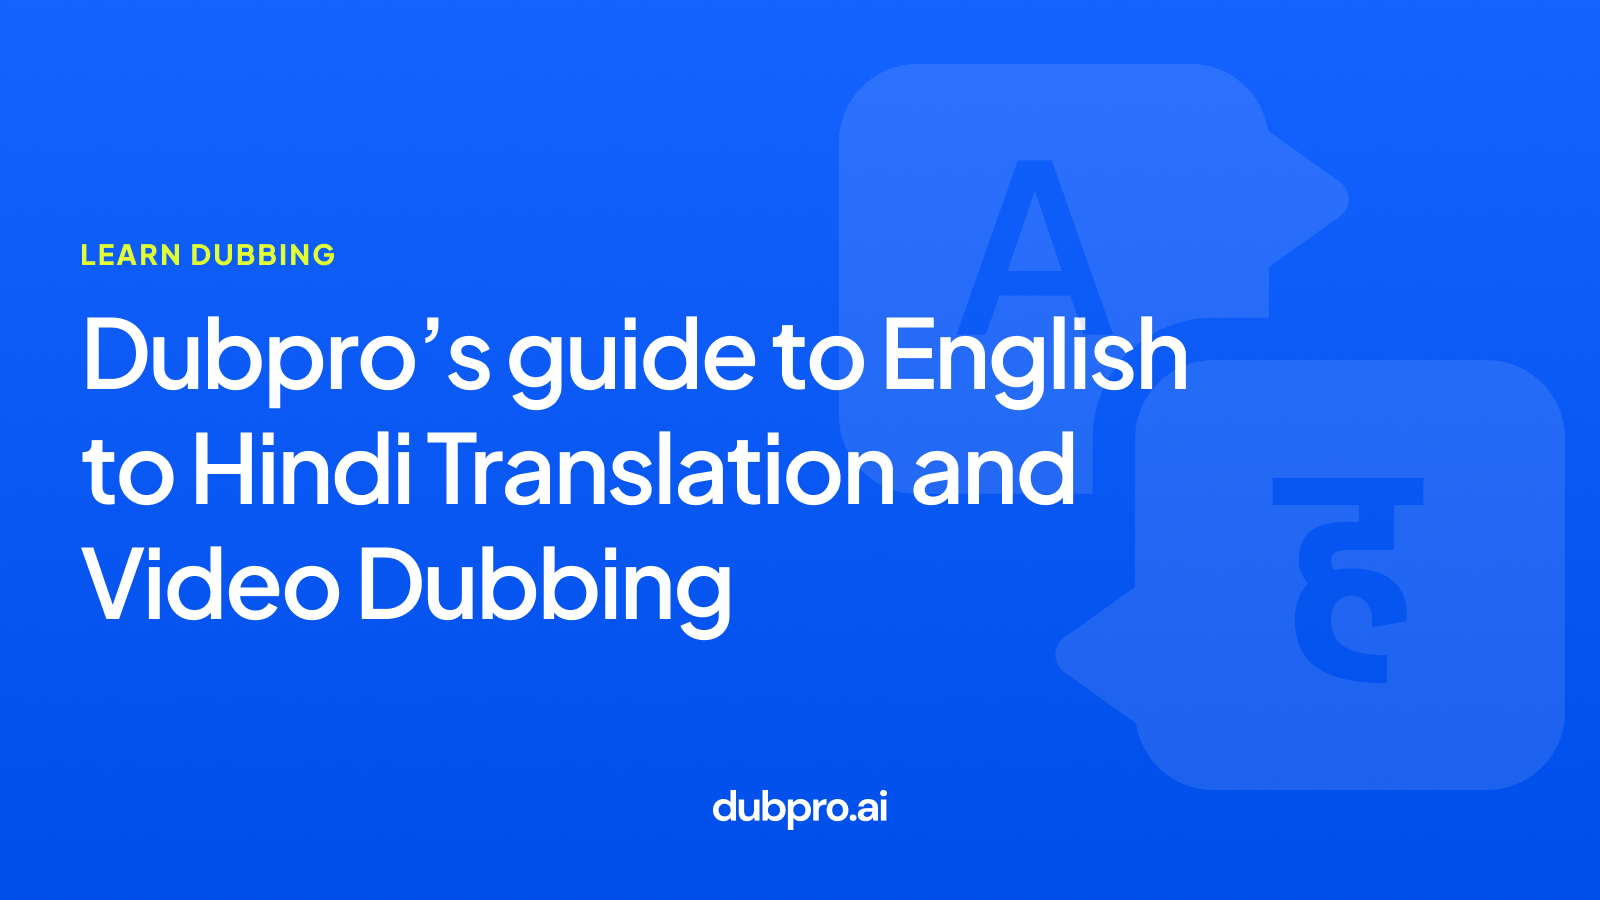 Dubpro’s Guide to English to Hindi Translation and Video Dubbing